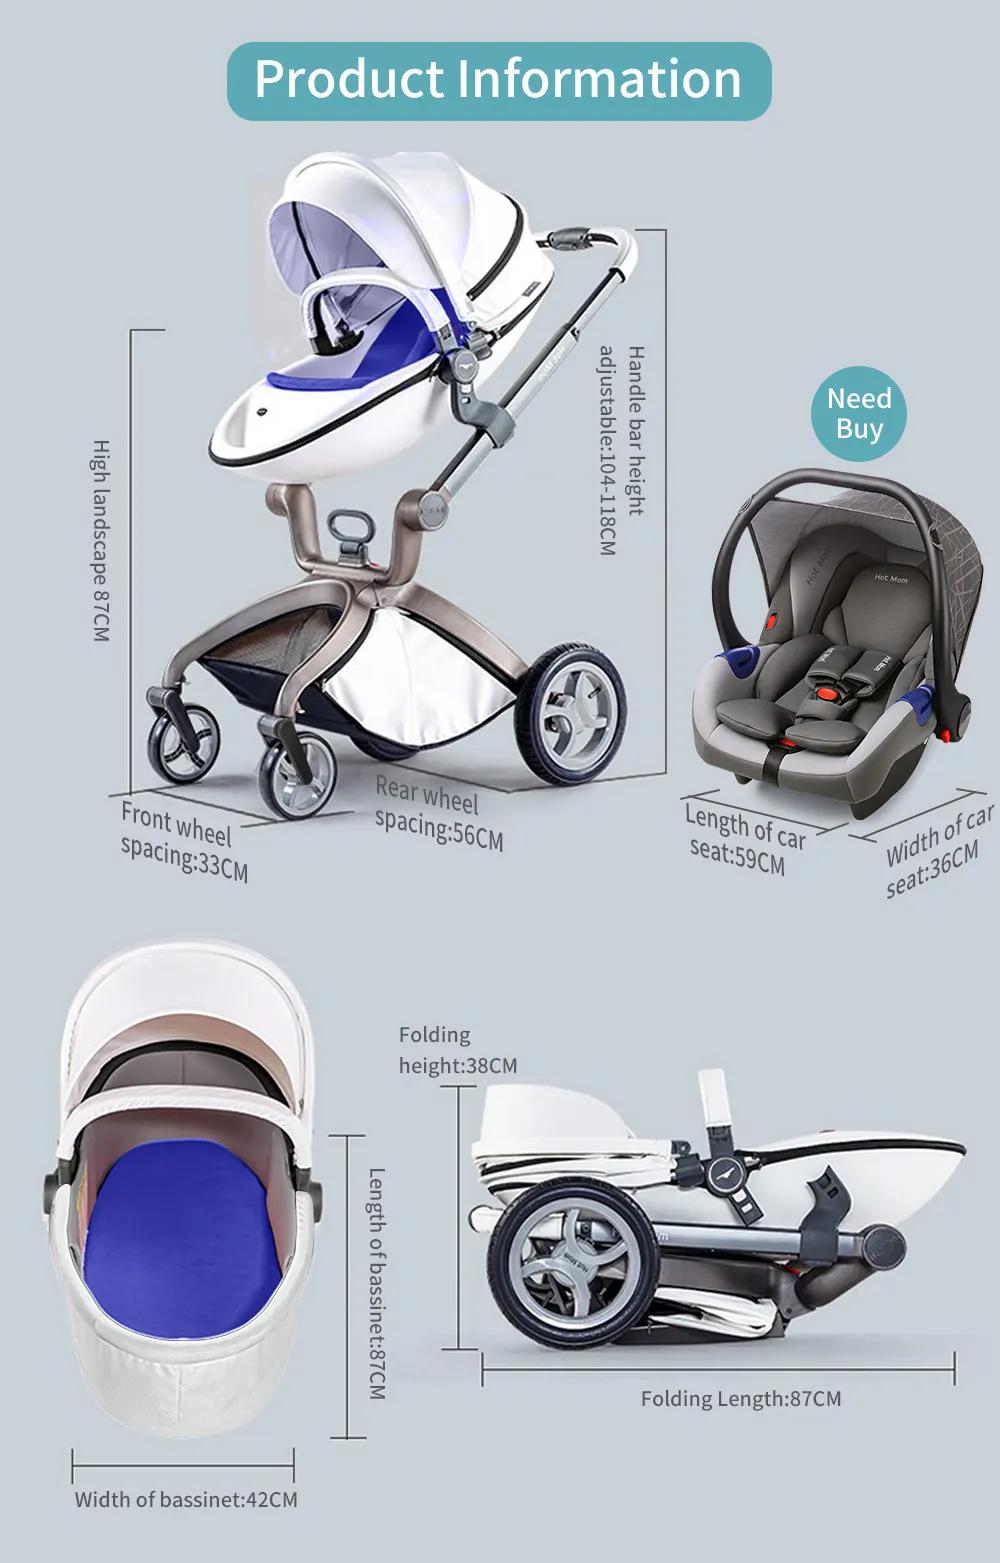 Baby Stroller 3 in 1,Hot Mom travel system High Land-scape stroller with bassinet Folding Carriage for Newborns baby,F22